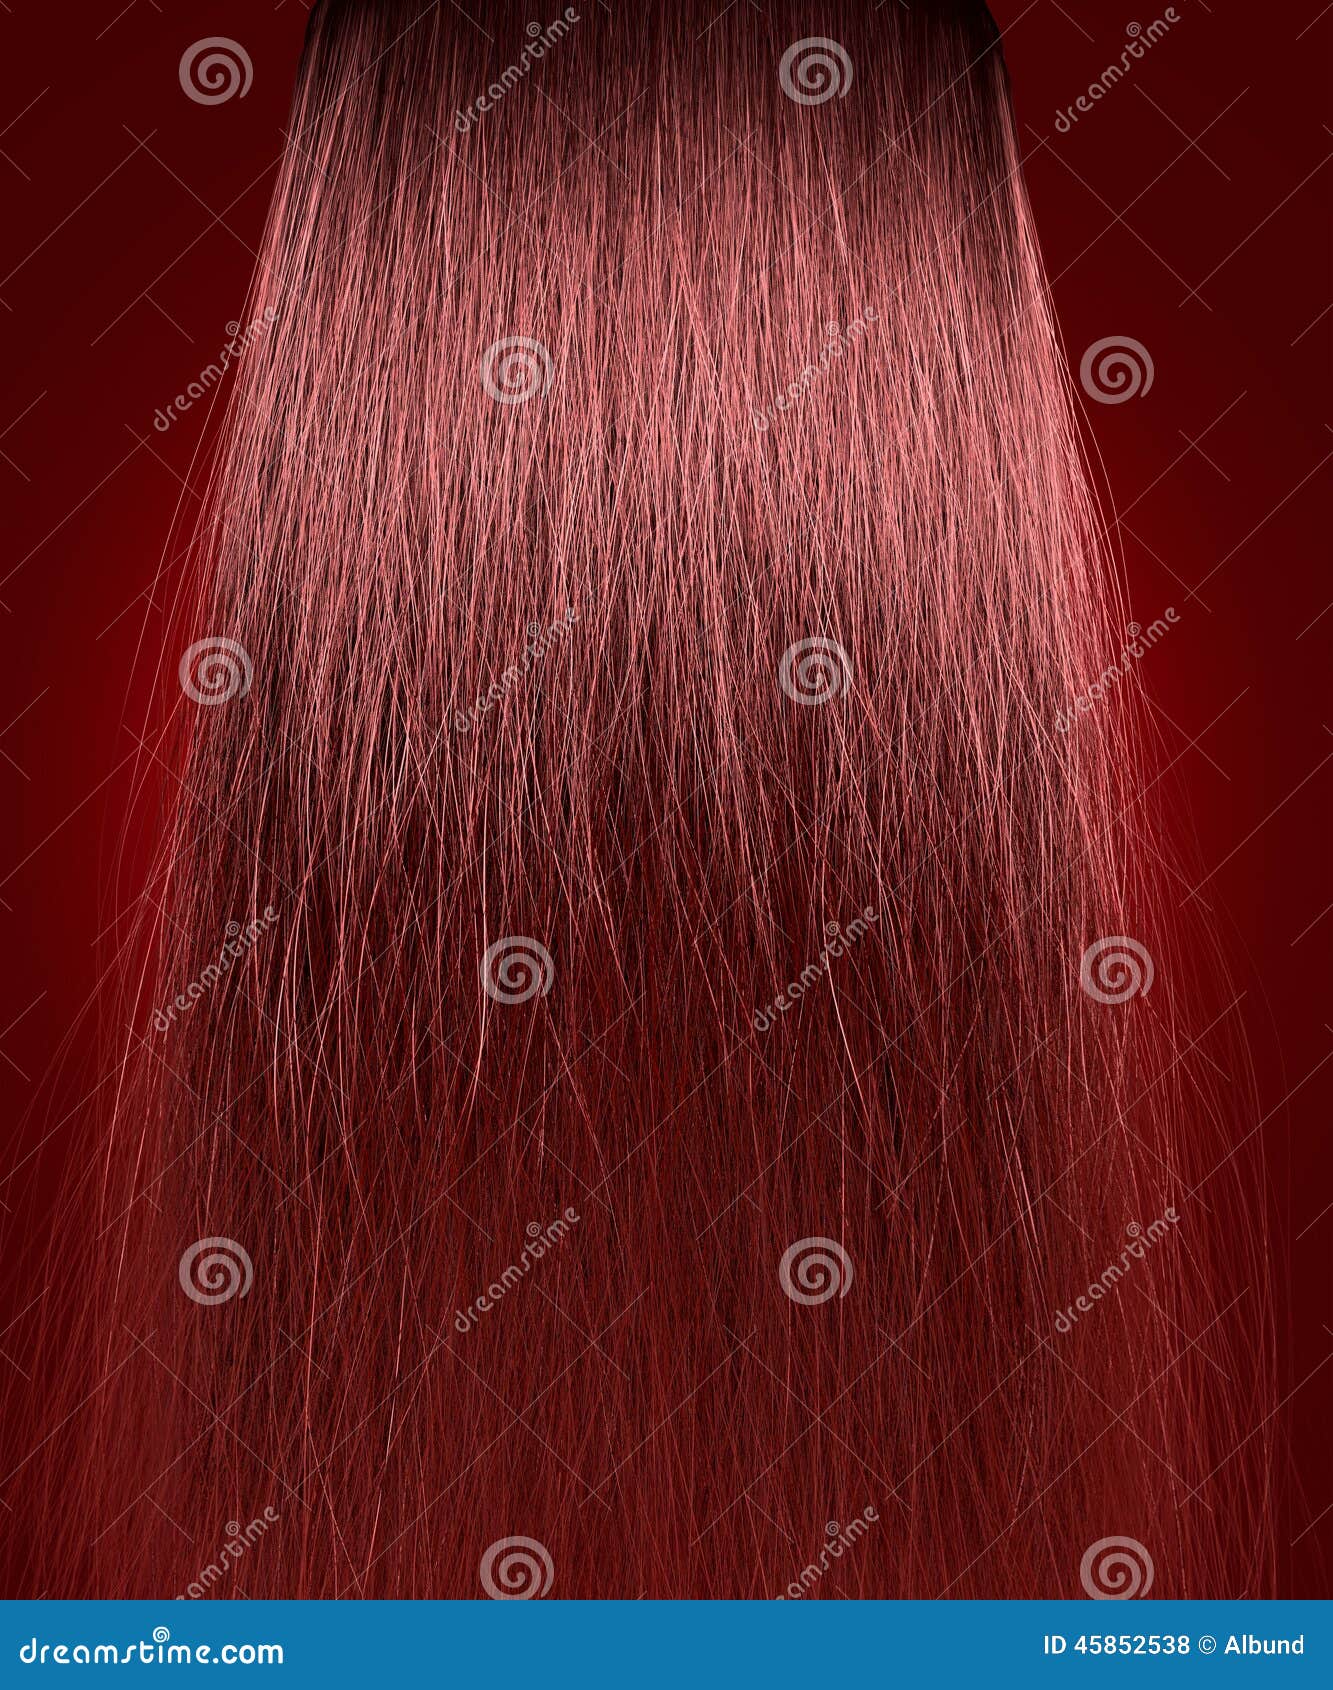 Red Hair Frizzy stock photo. Image of blonde, brown, detail - 45852538